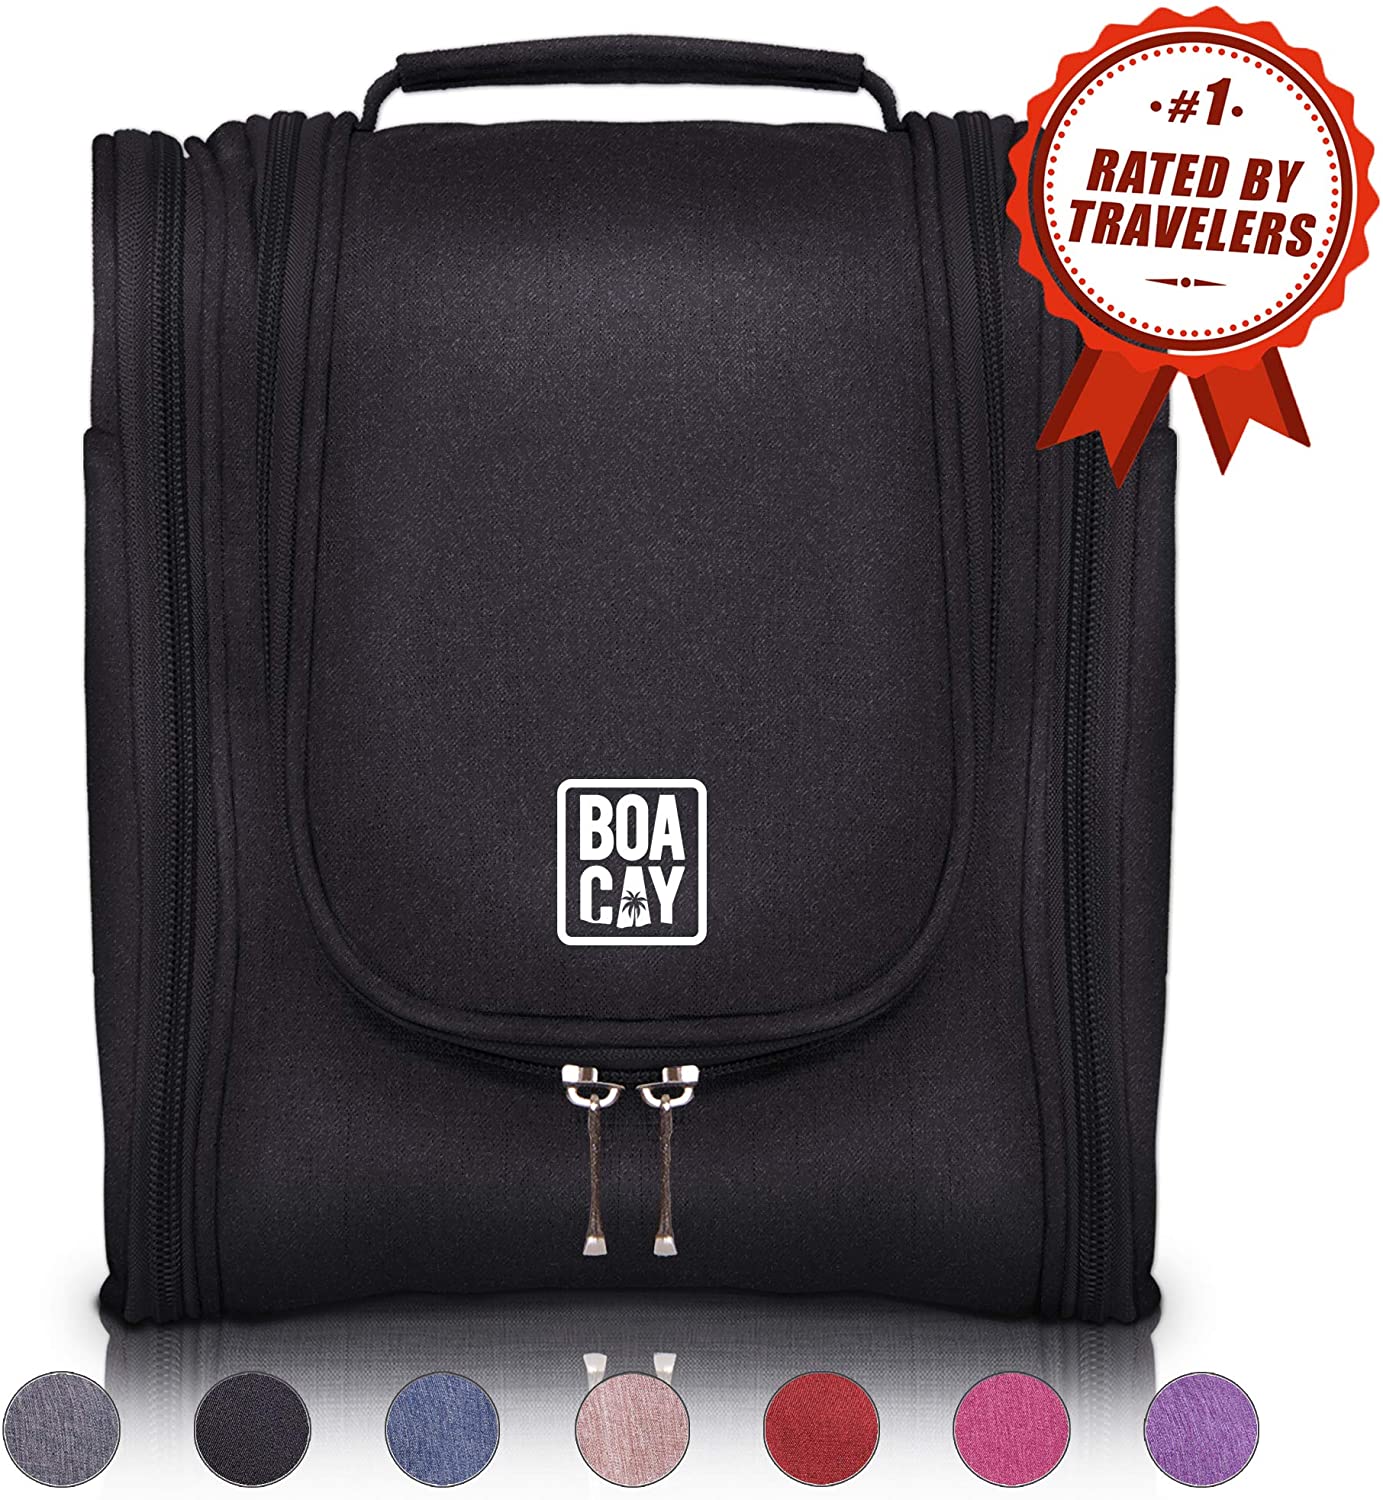 Hanging Travel Toiletry Bag from BOACAY